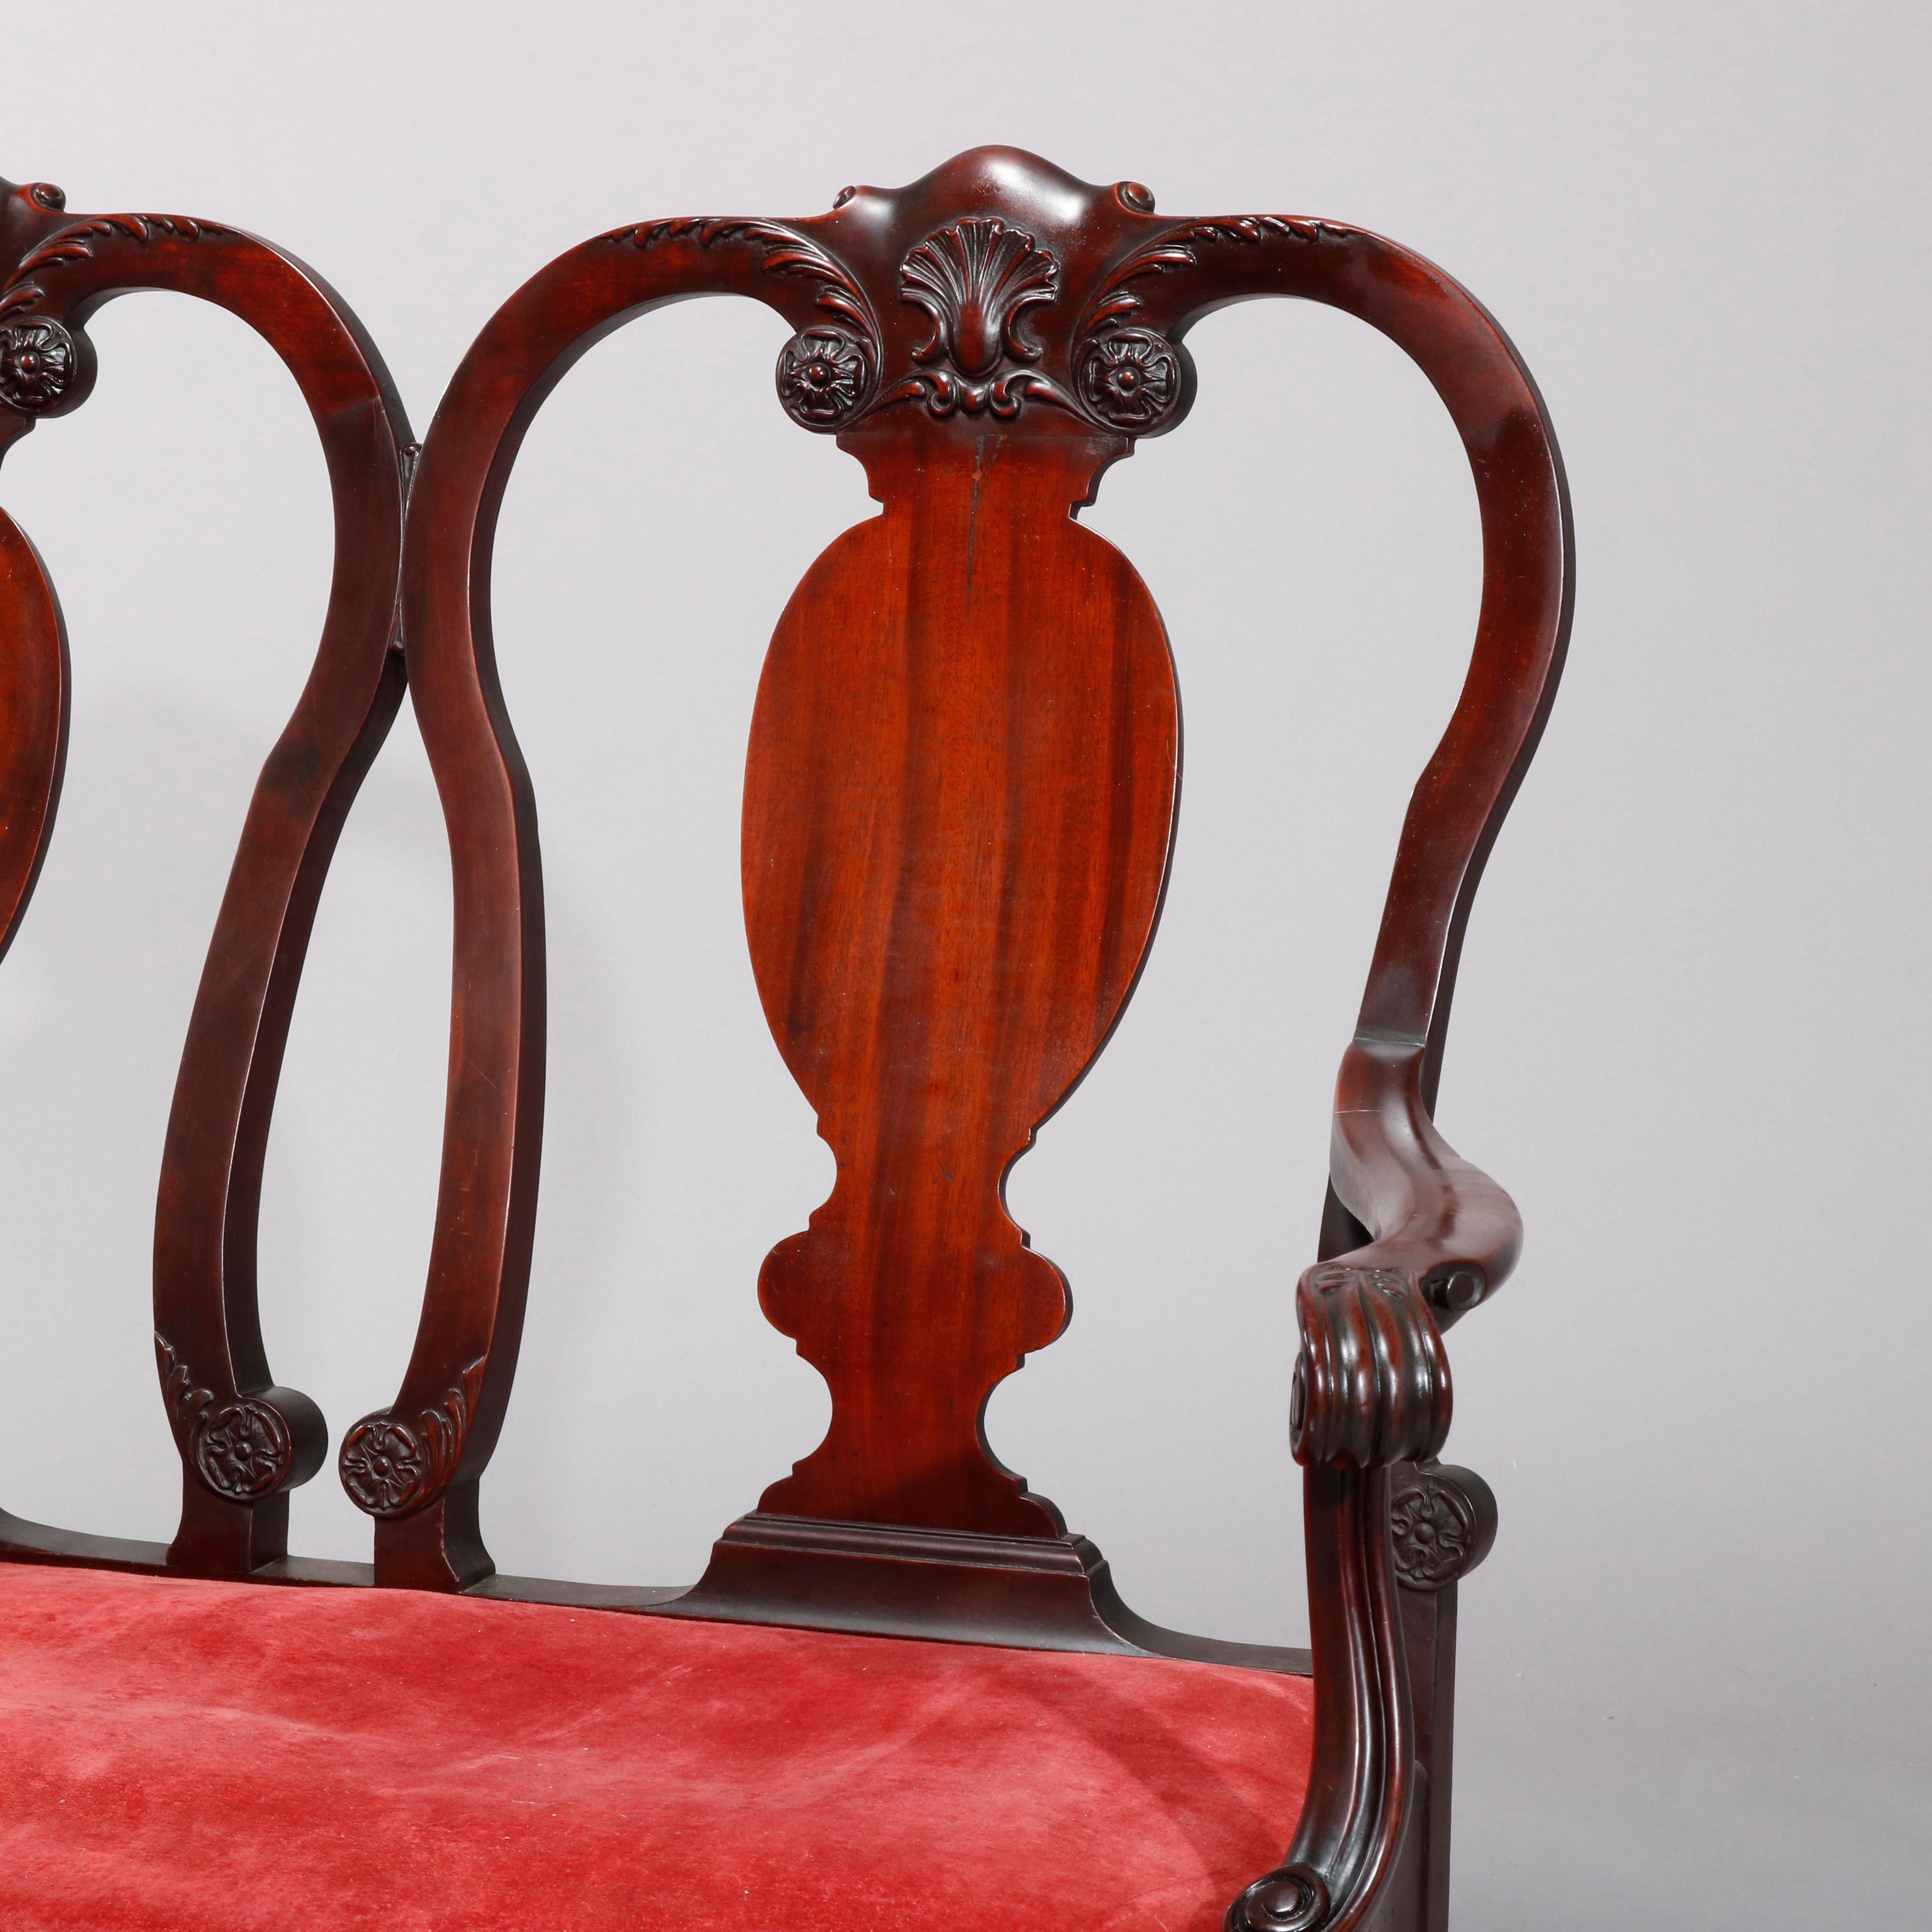 An antique English Chippendale style double chair of settee offers mahogany frame with carved shell and foliate crests over violin form slat backs surmounting upholstered seat with scroll arms, raised on cabriole legs terminating in paw feet, circa